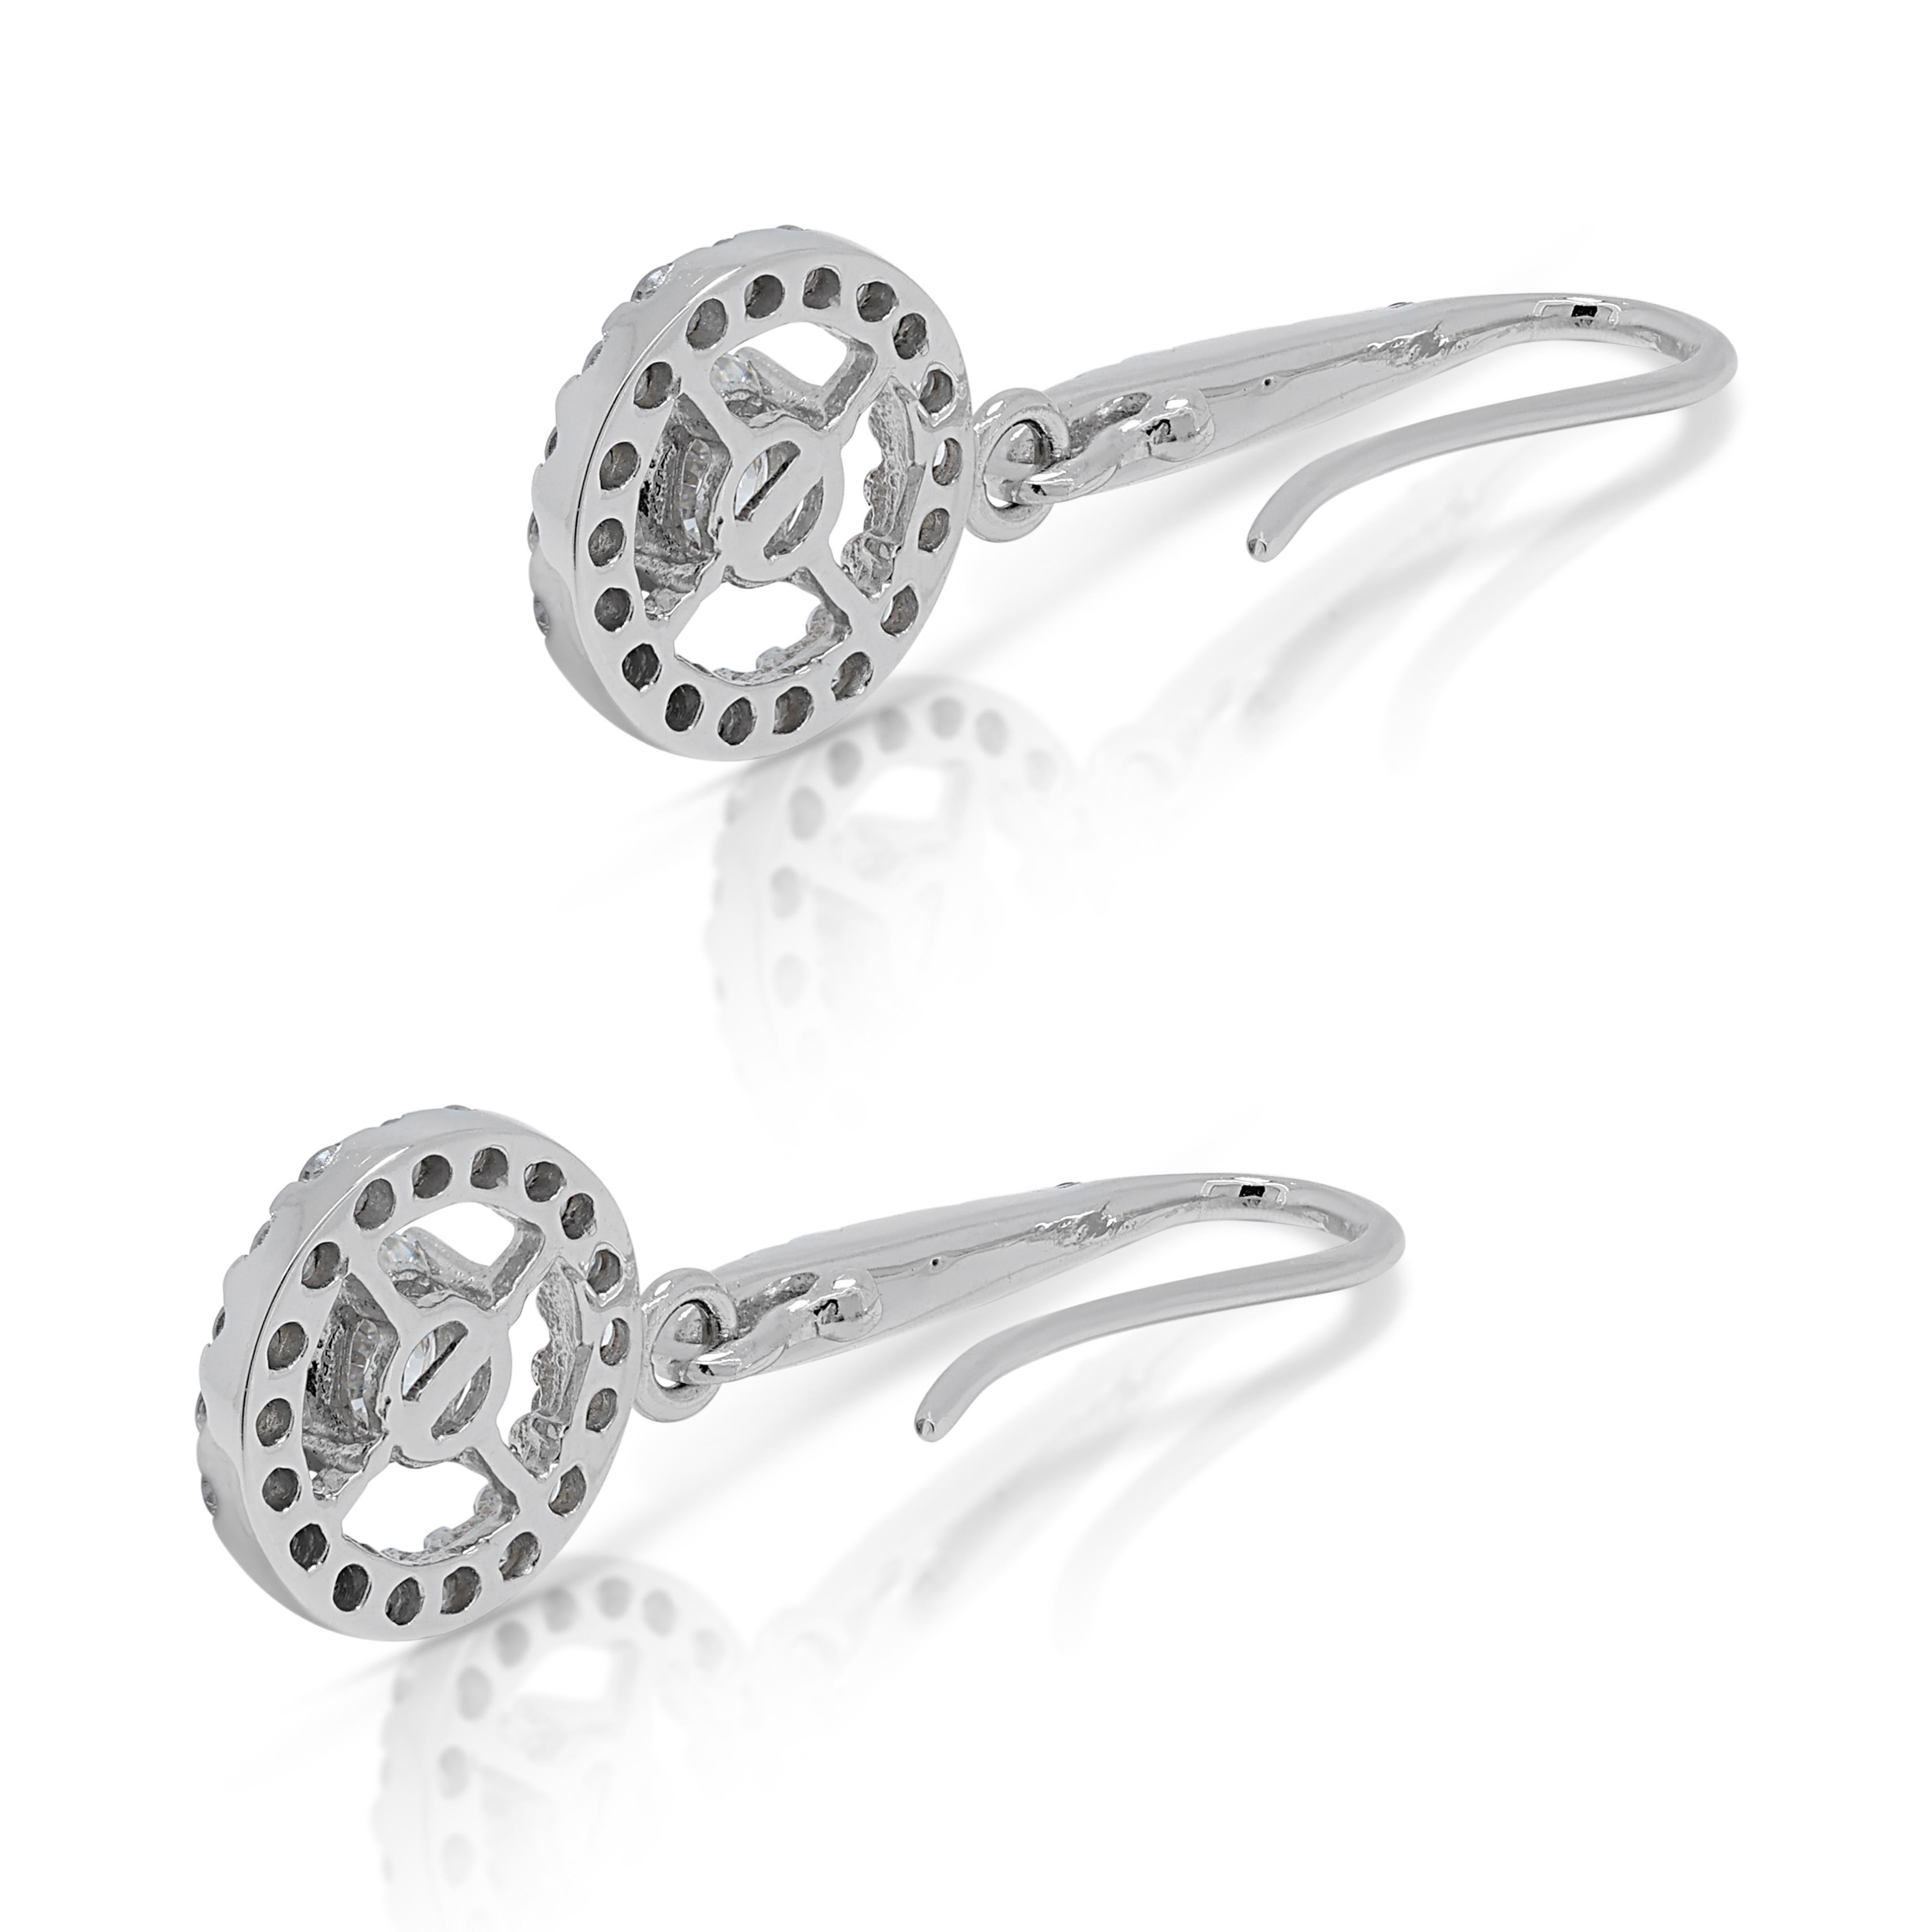 Fascinating 0.86ct Diamond Dangling Earrings in 18K White Gold  For Sale 4